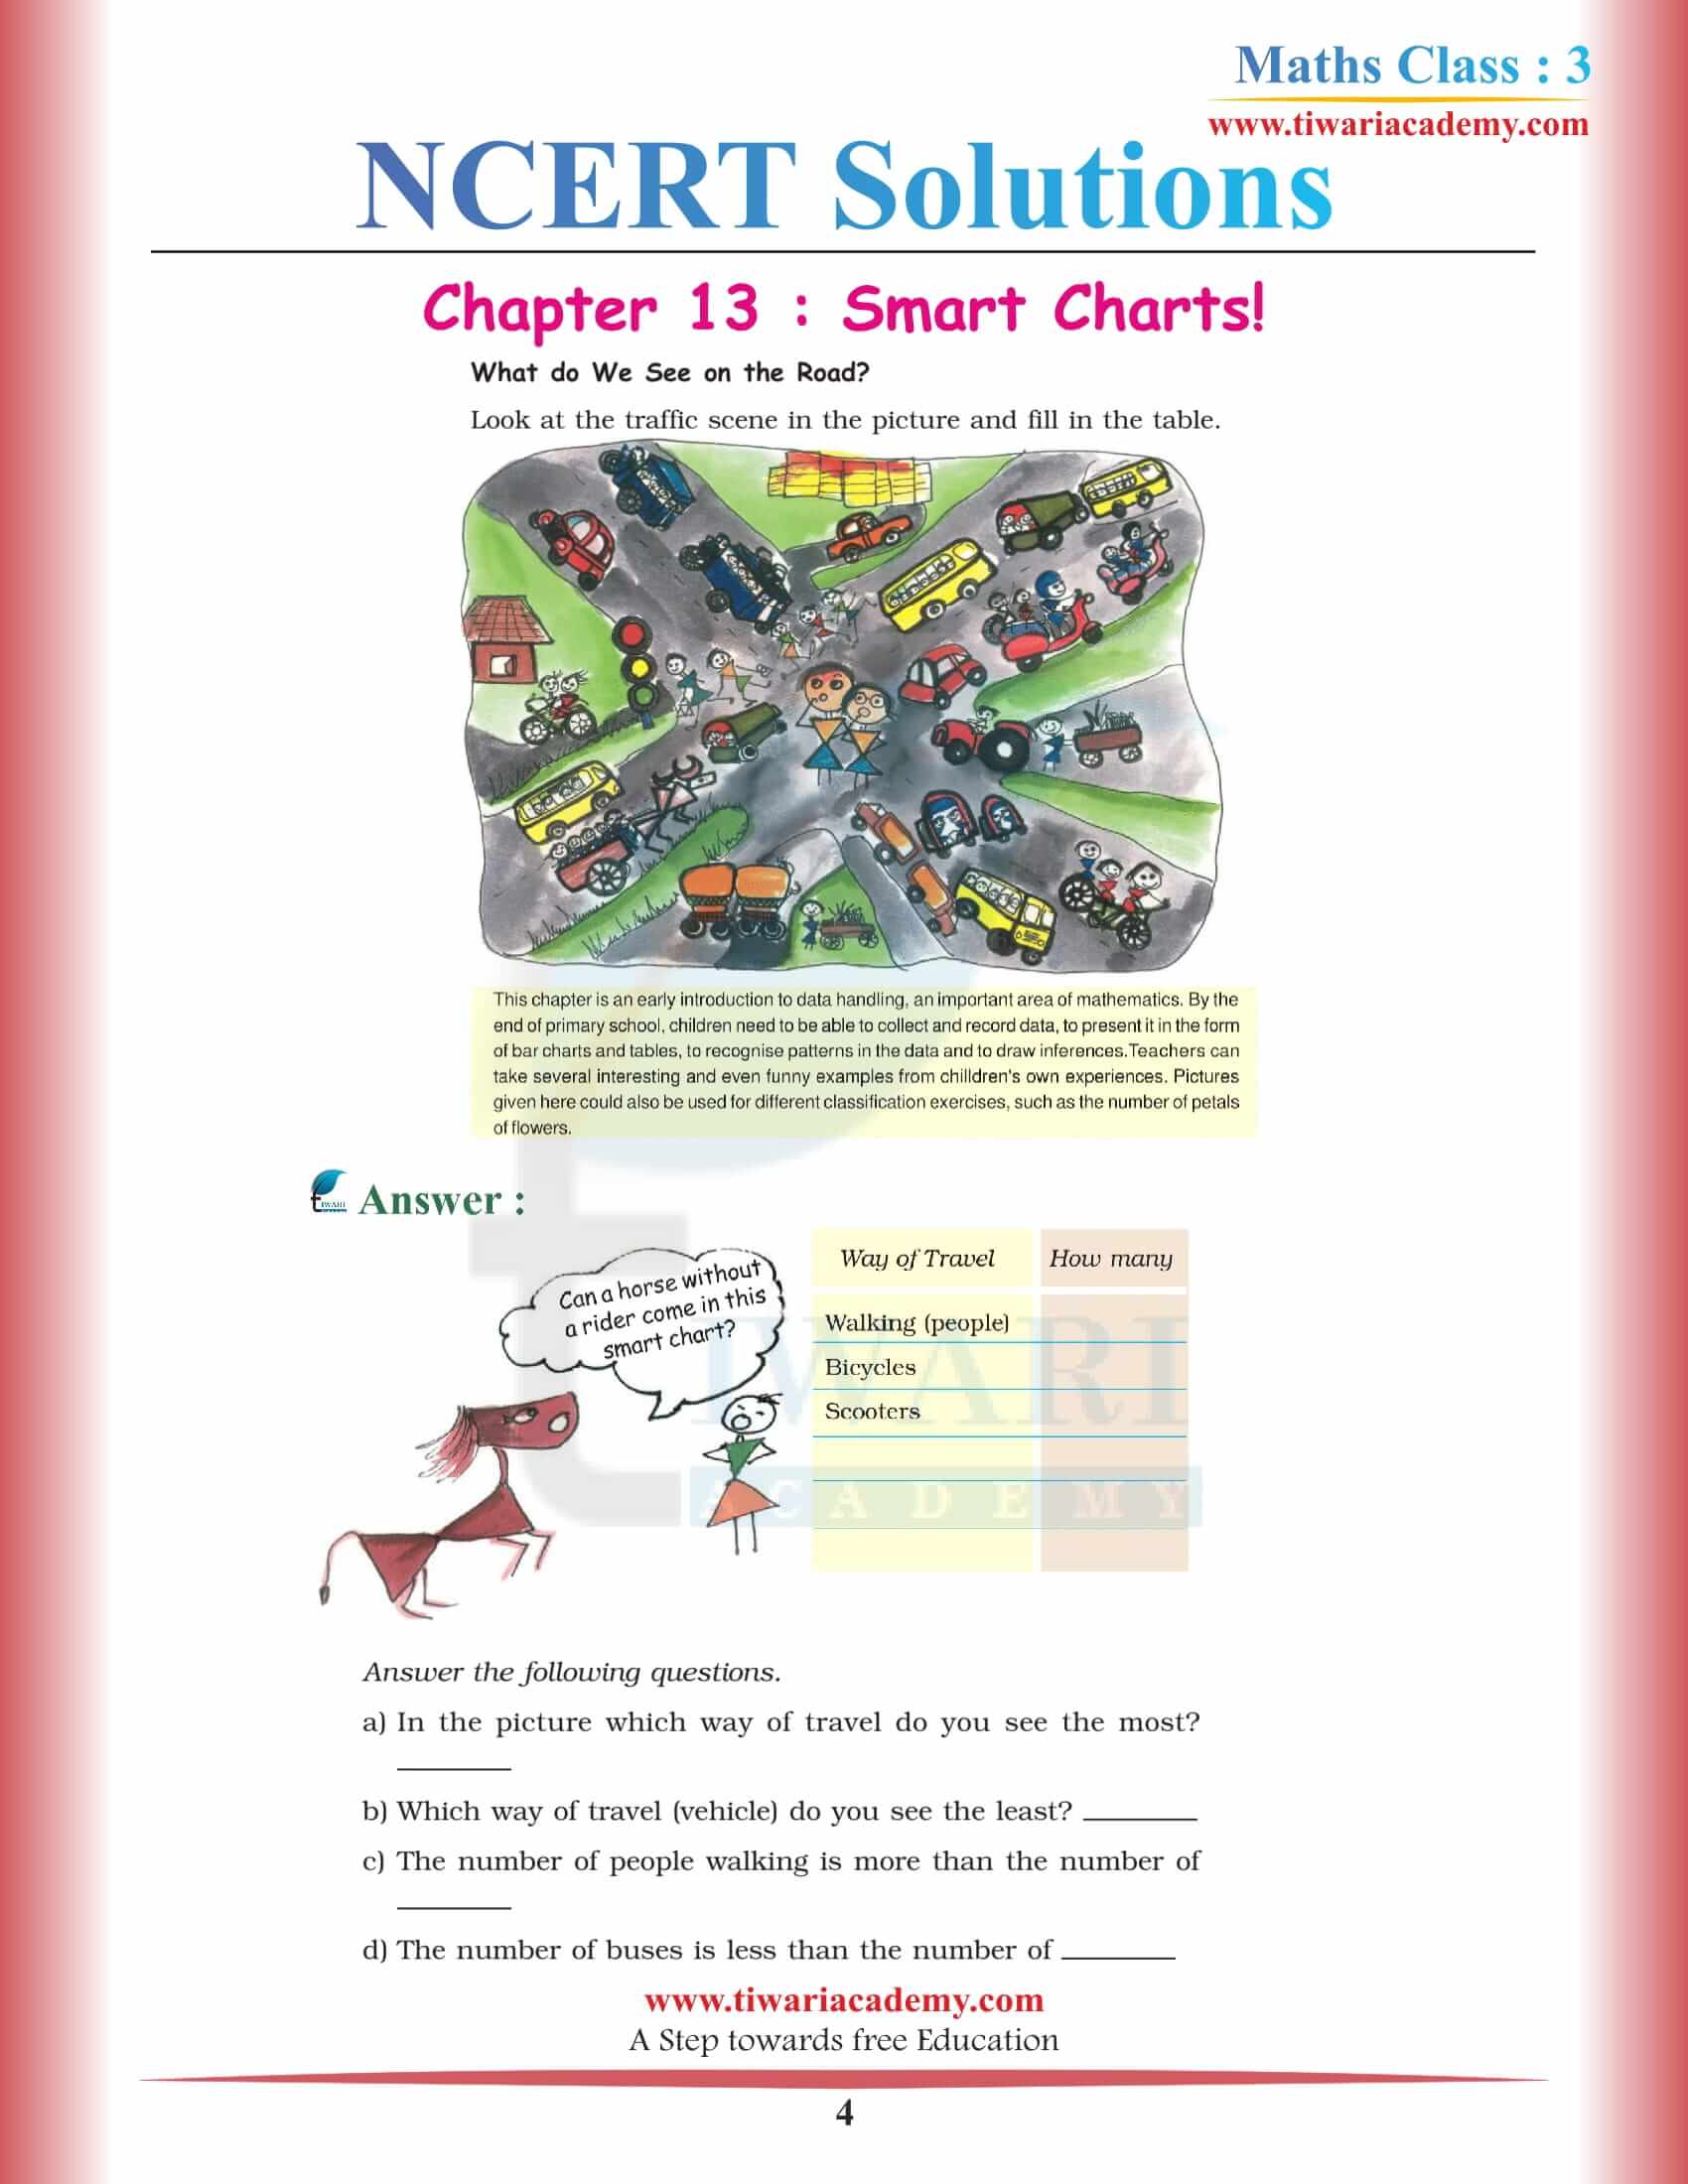 NCERT Solutions for Class 3 Maths Chapter 13 in English Medium